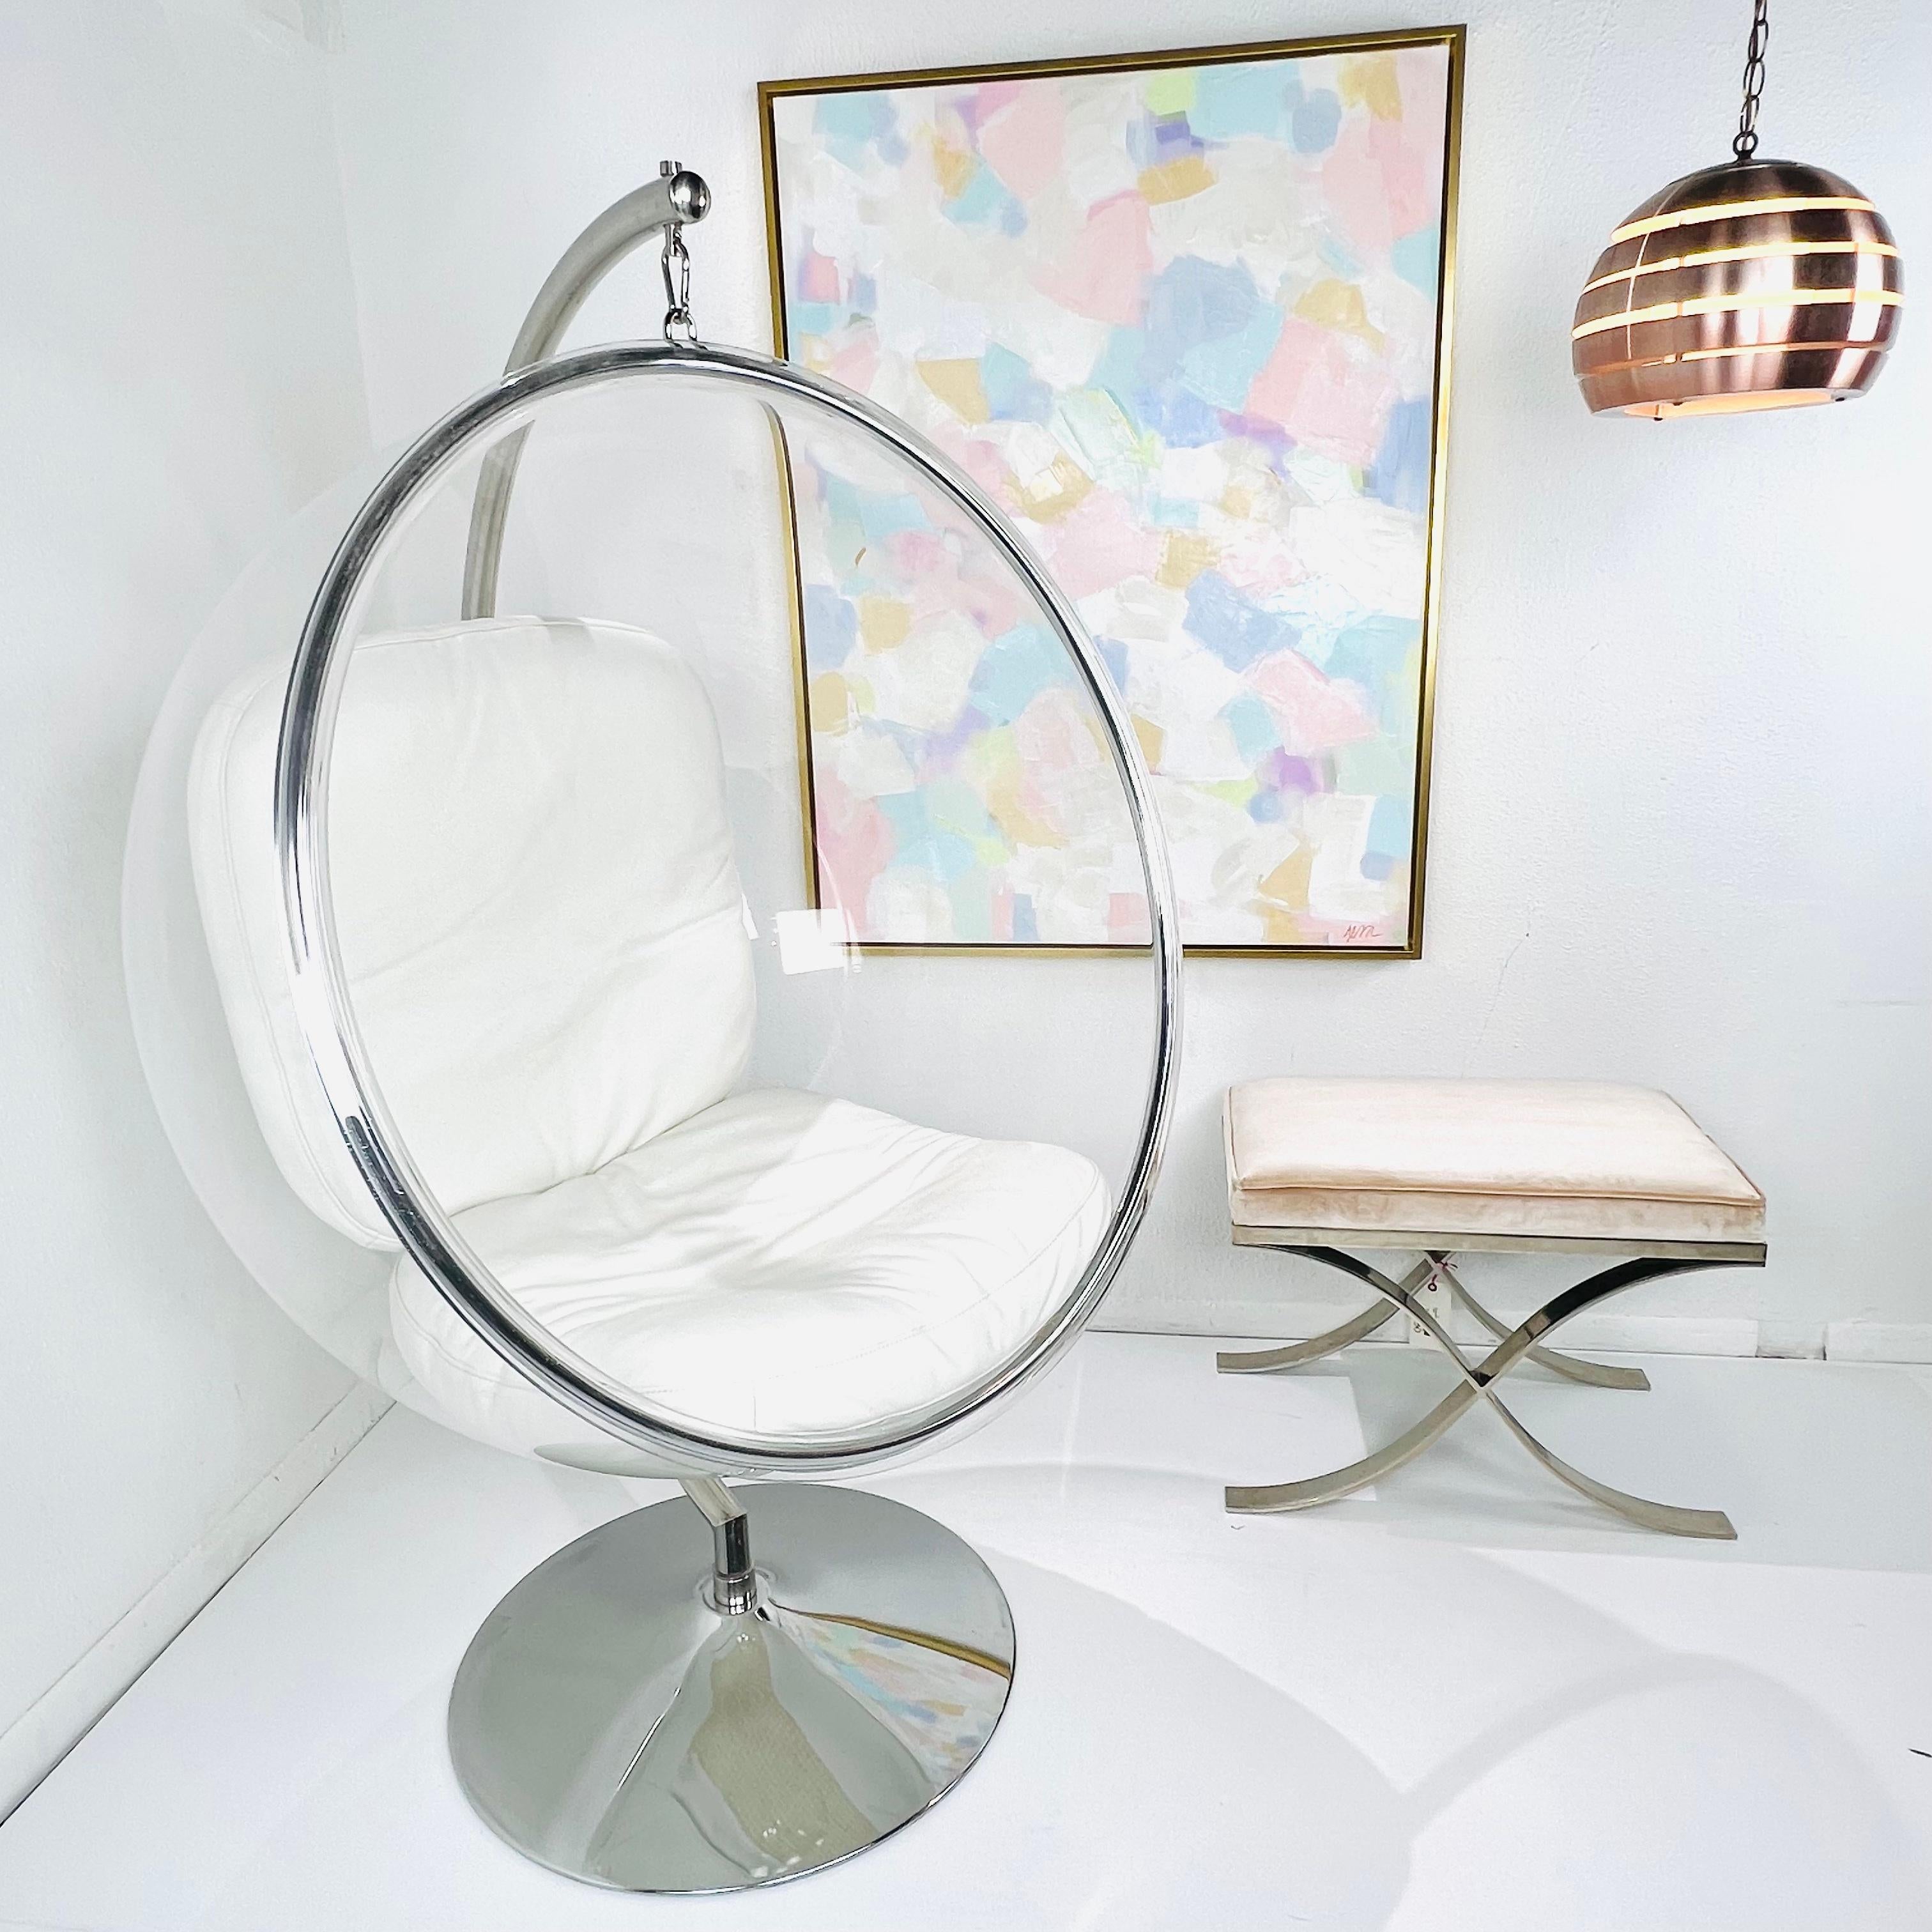 Eero Aarnio designed the original Bubble chair in 1968 while residing in Finland. The industrial modernist design of the chair provides for a seating experience that is simultaneously encapsulating and transparent at the same time. The floating